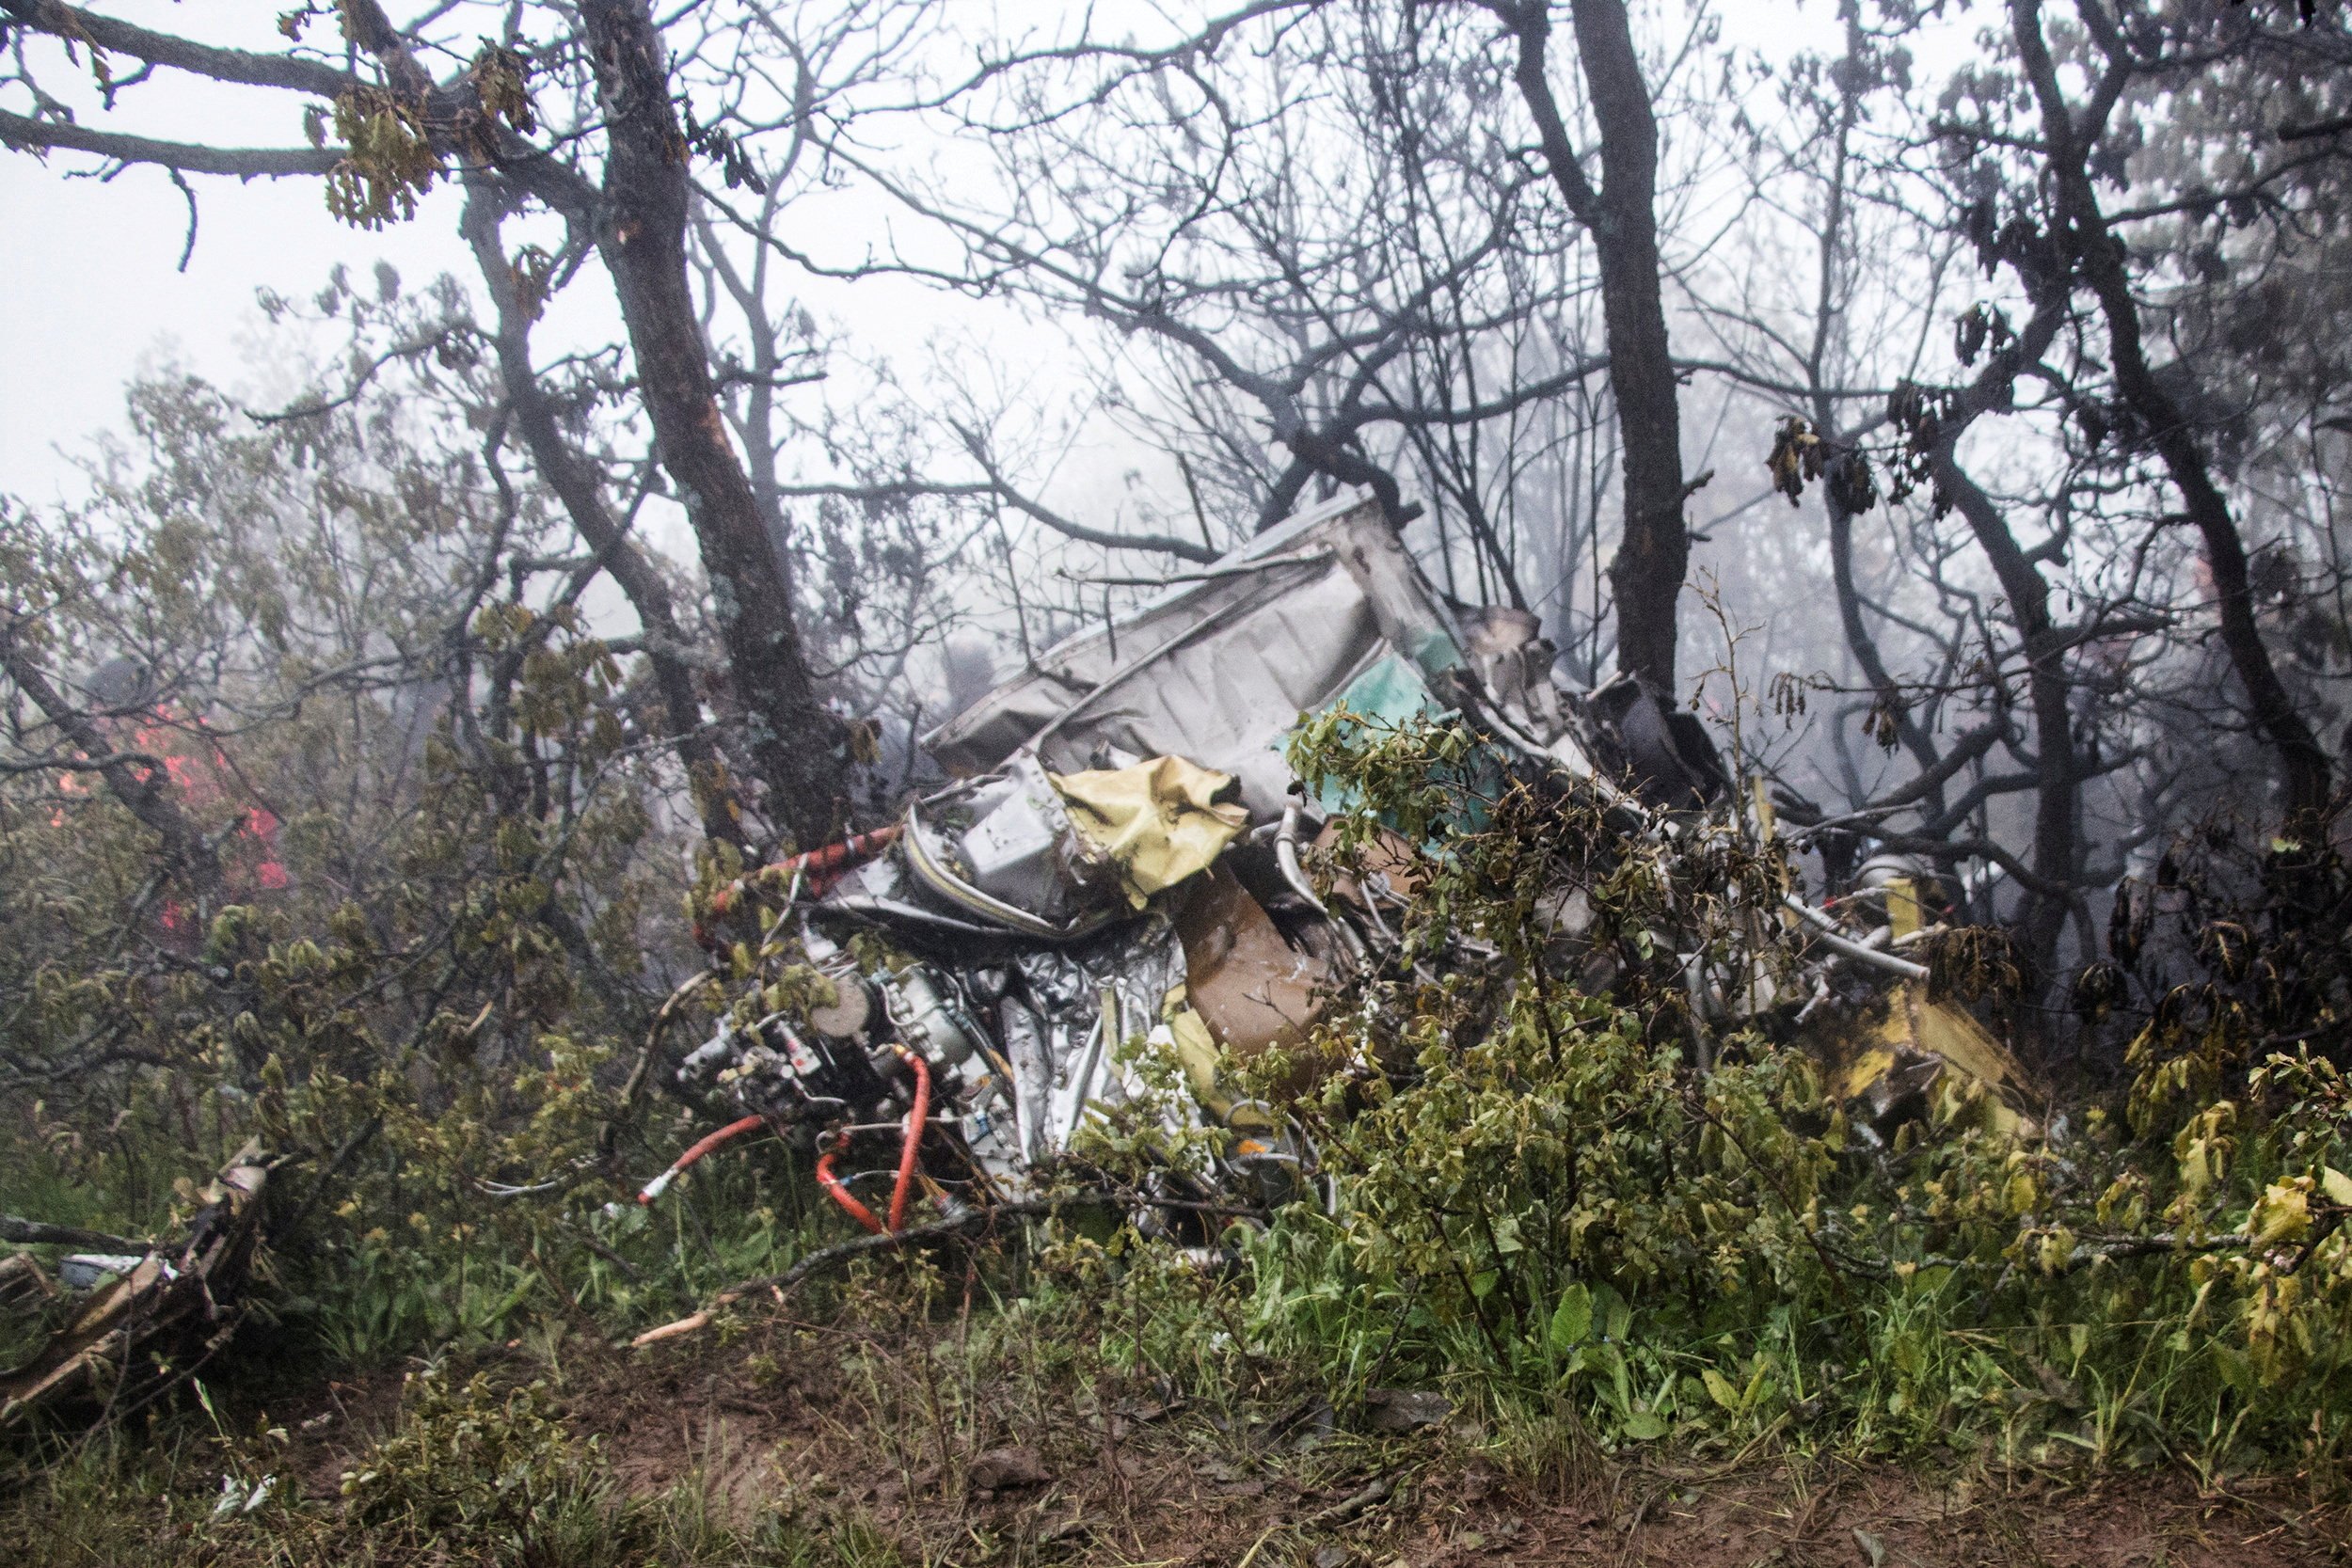 The wreckage of Iranian president Ebrahim Raisi’s helicopter at the crash site on a mountain in Varzaghan area, northwestern Iran on Monday. Photo: Stringer / WANA (West Asia News Agency) via Reuters